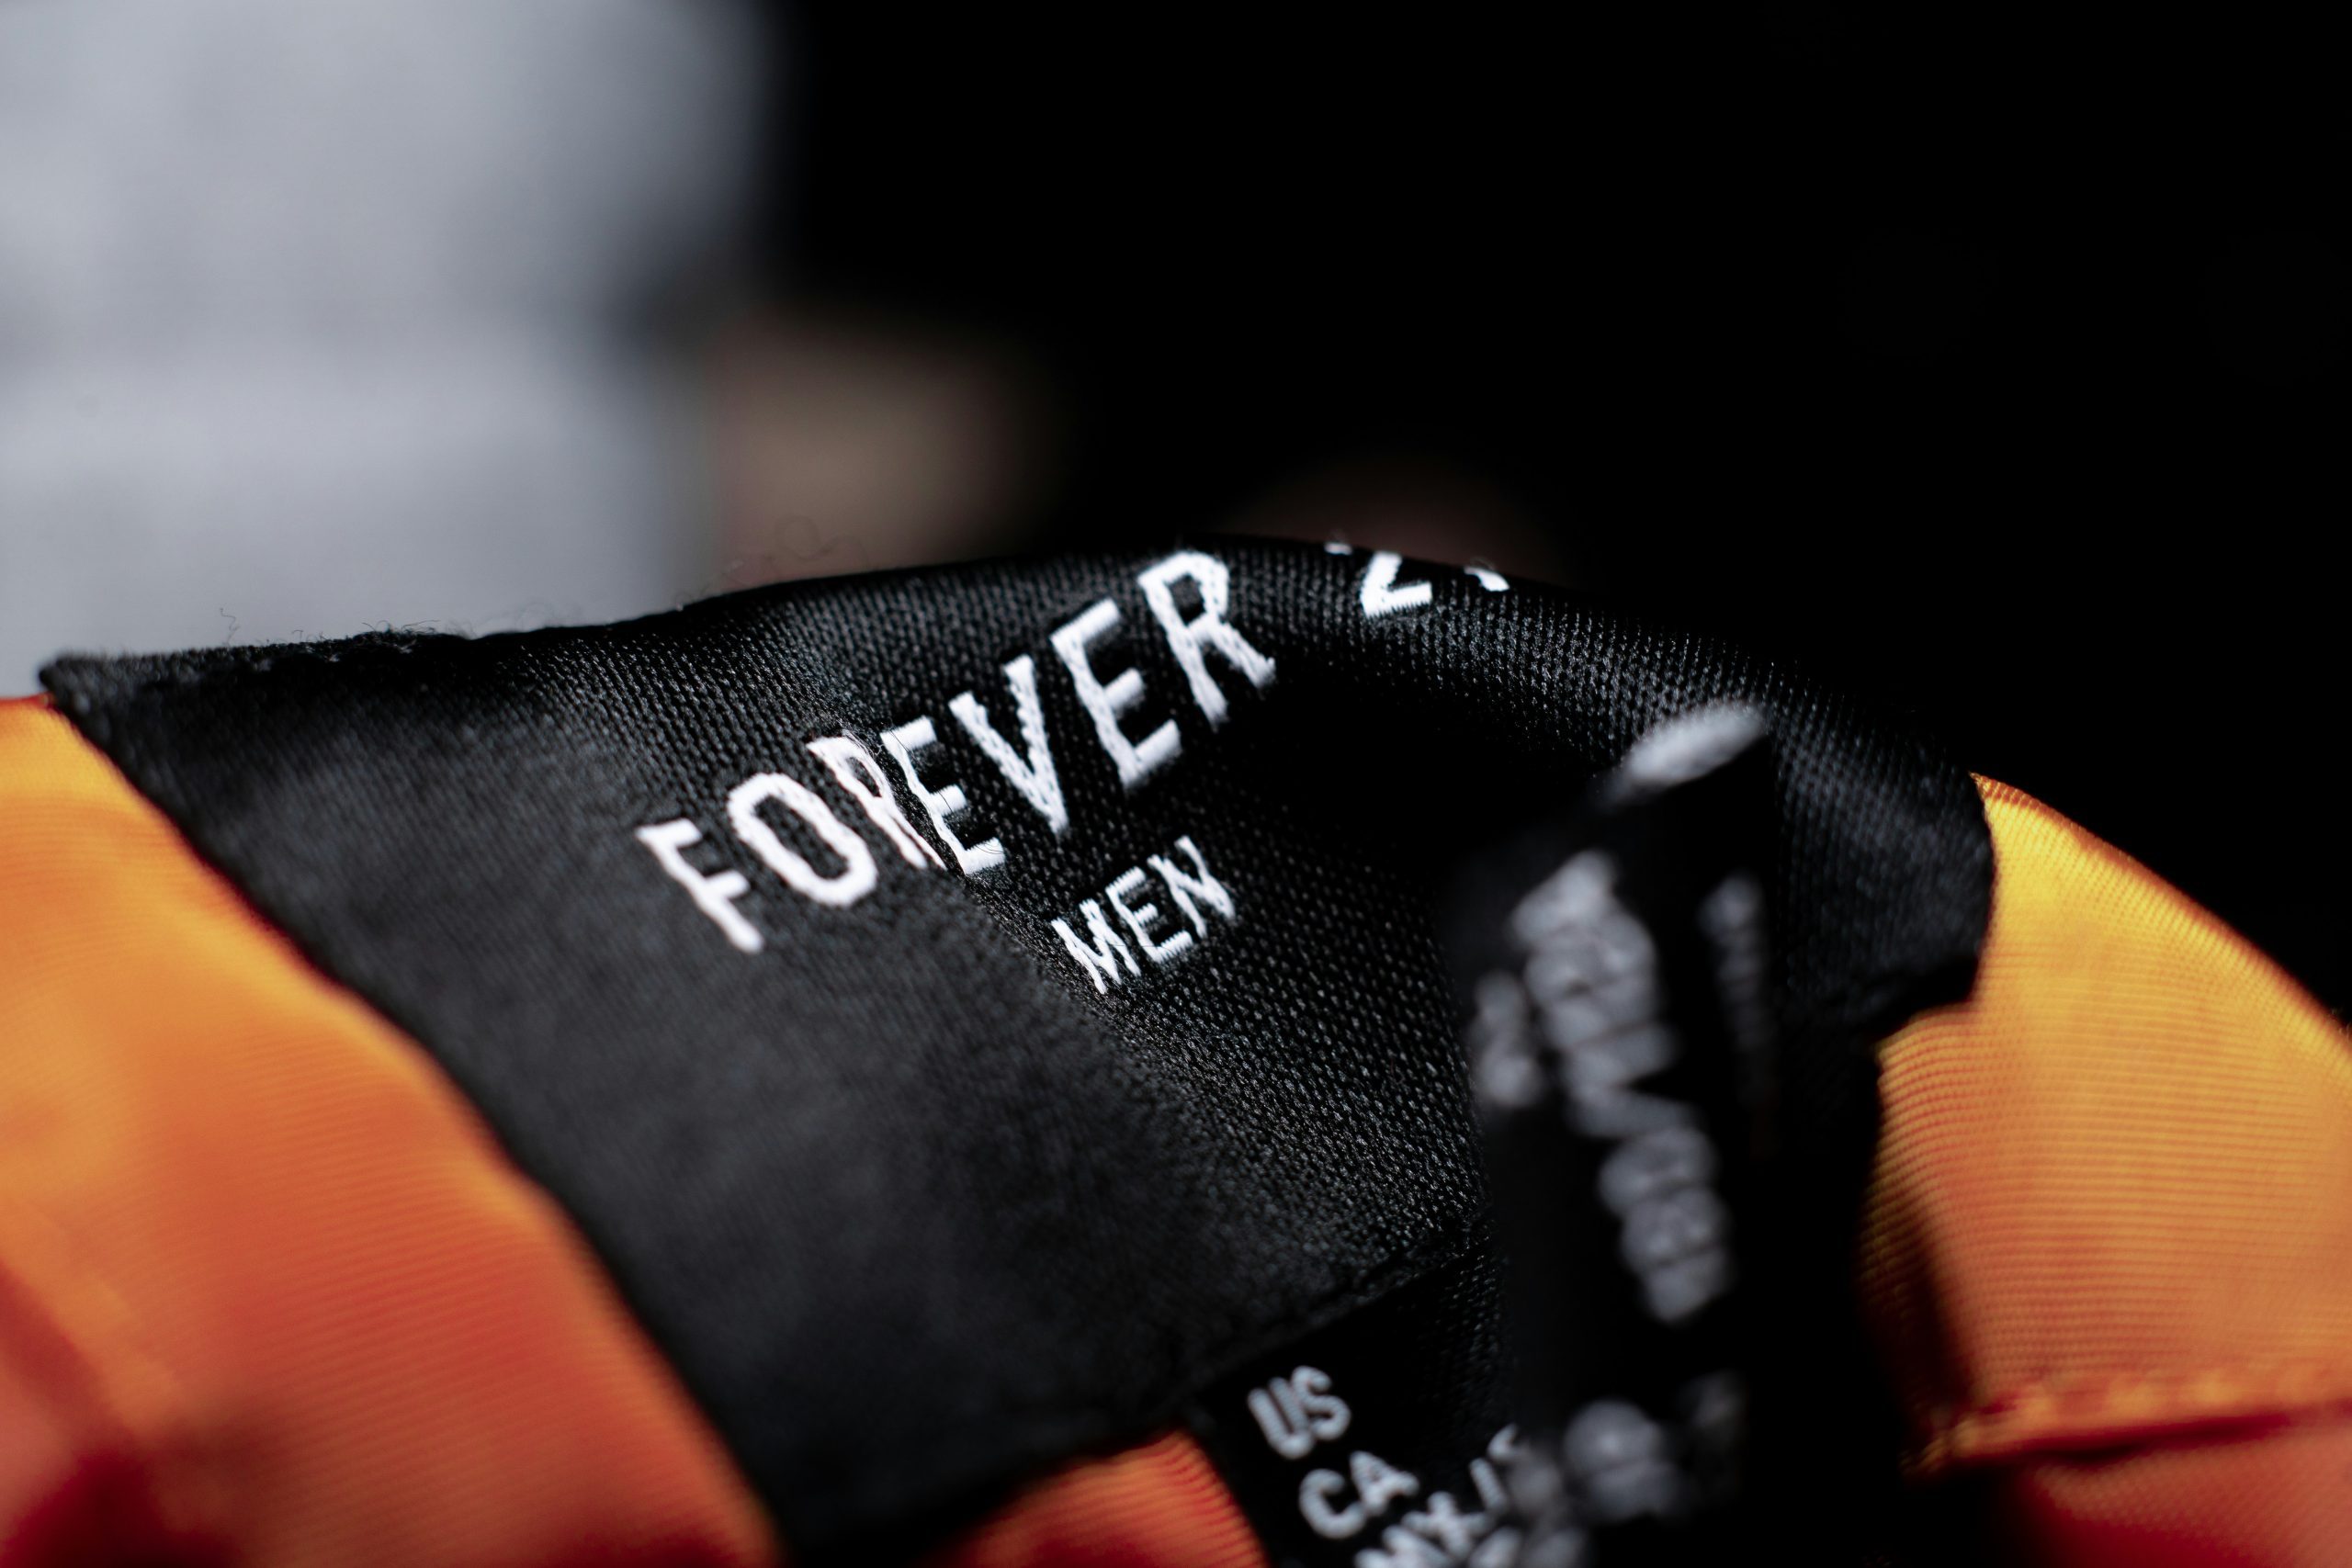 A forever 21 label on a man's coat.